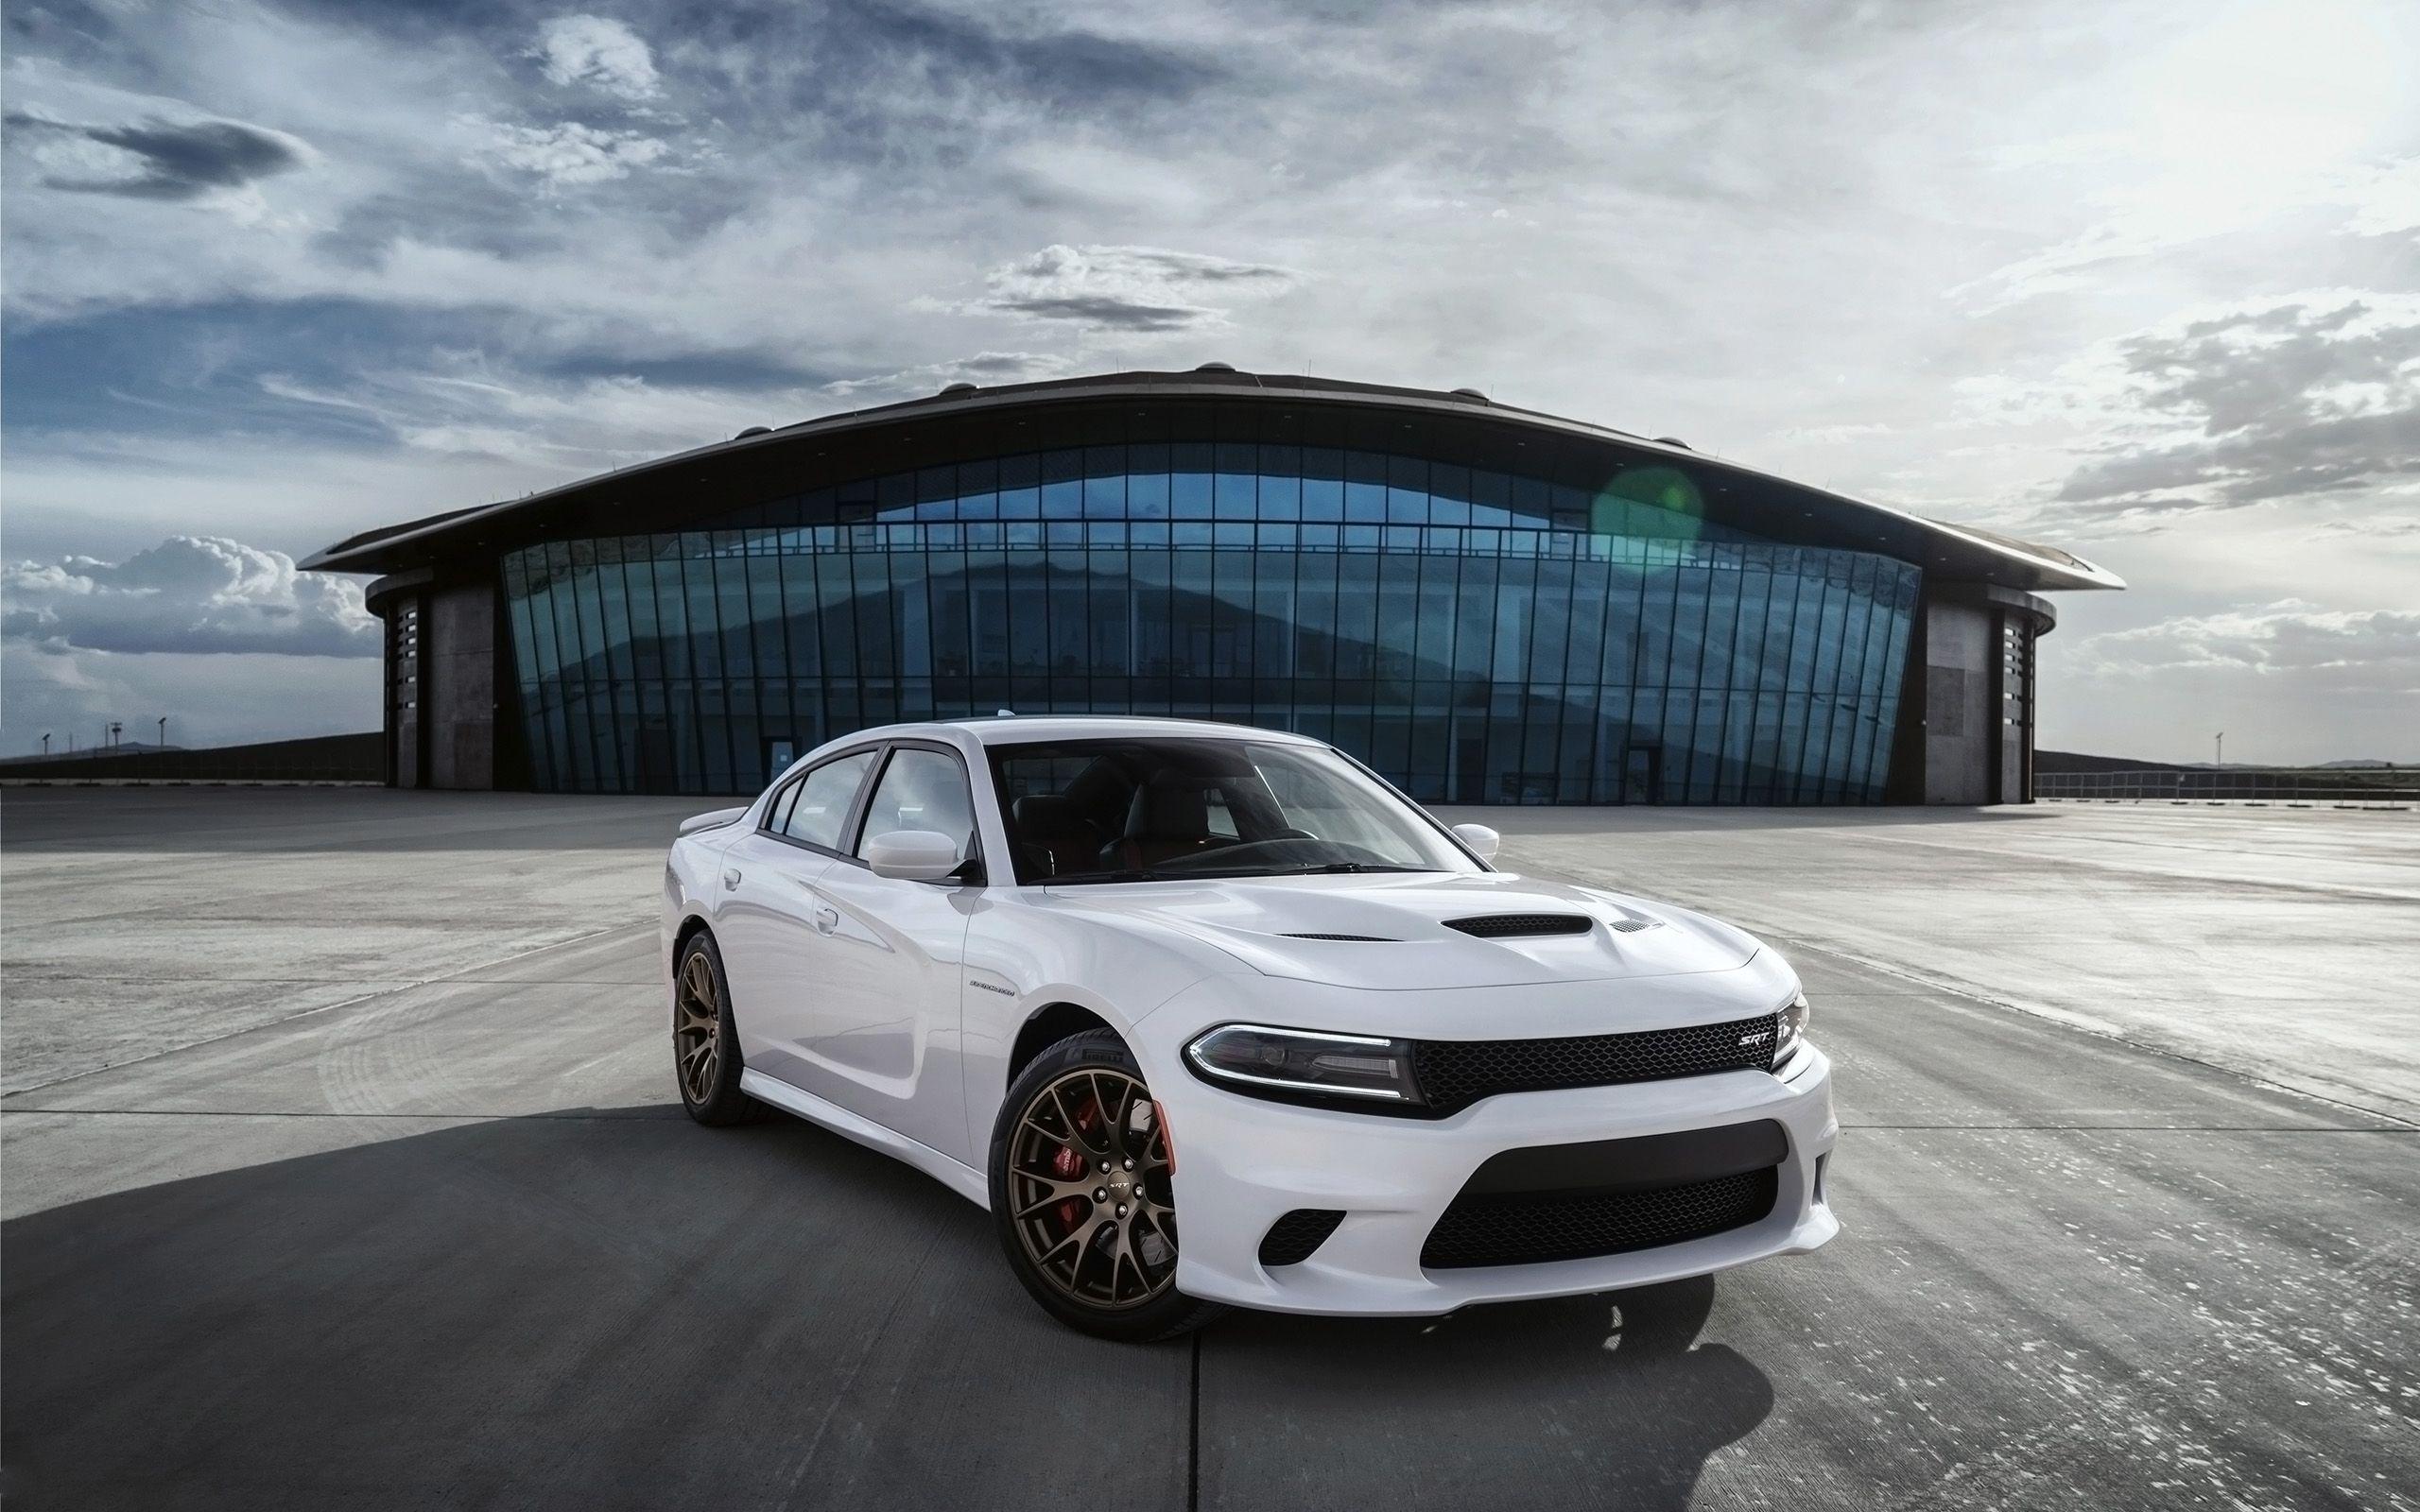 Download Dodge Charger Srt Hellcat wallpapers for mobile phone free  Dodge Charger Srt Hellcat HD pictures